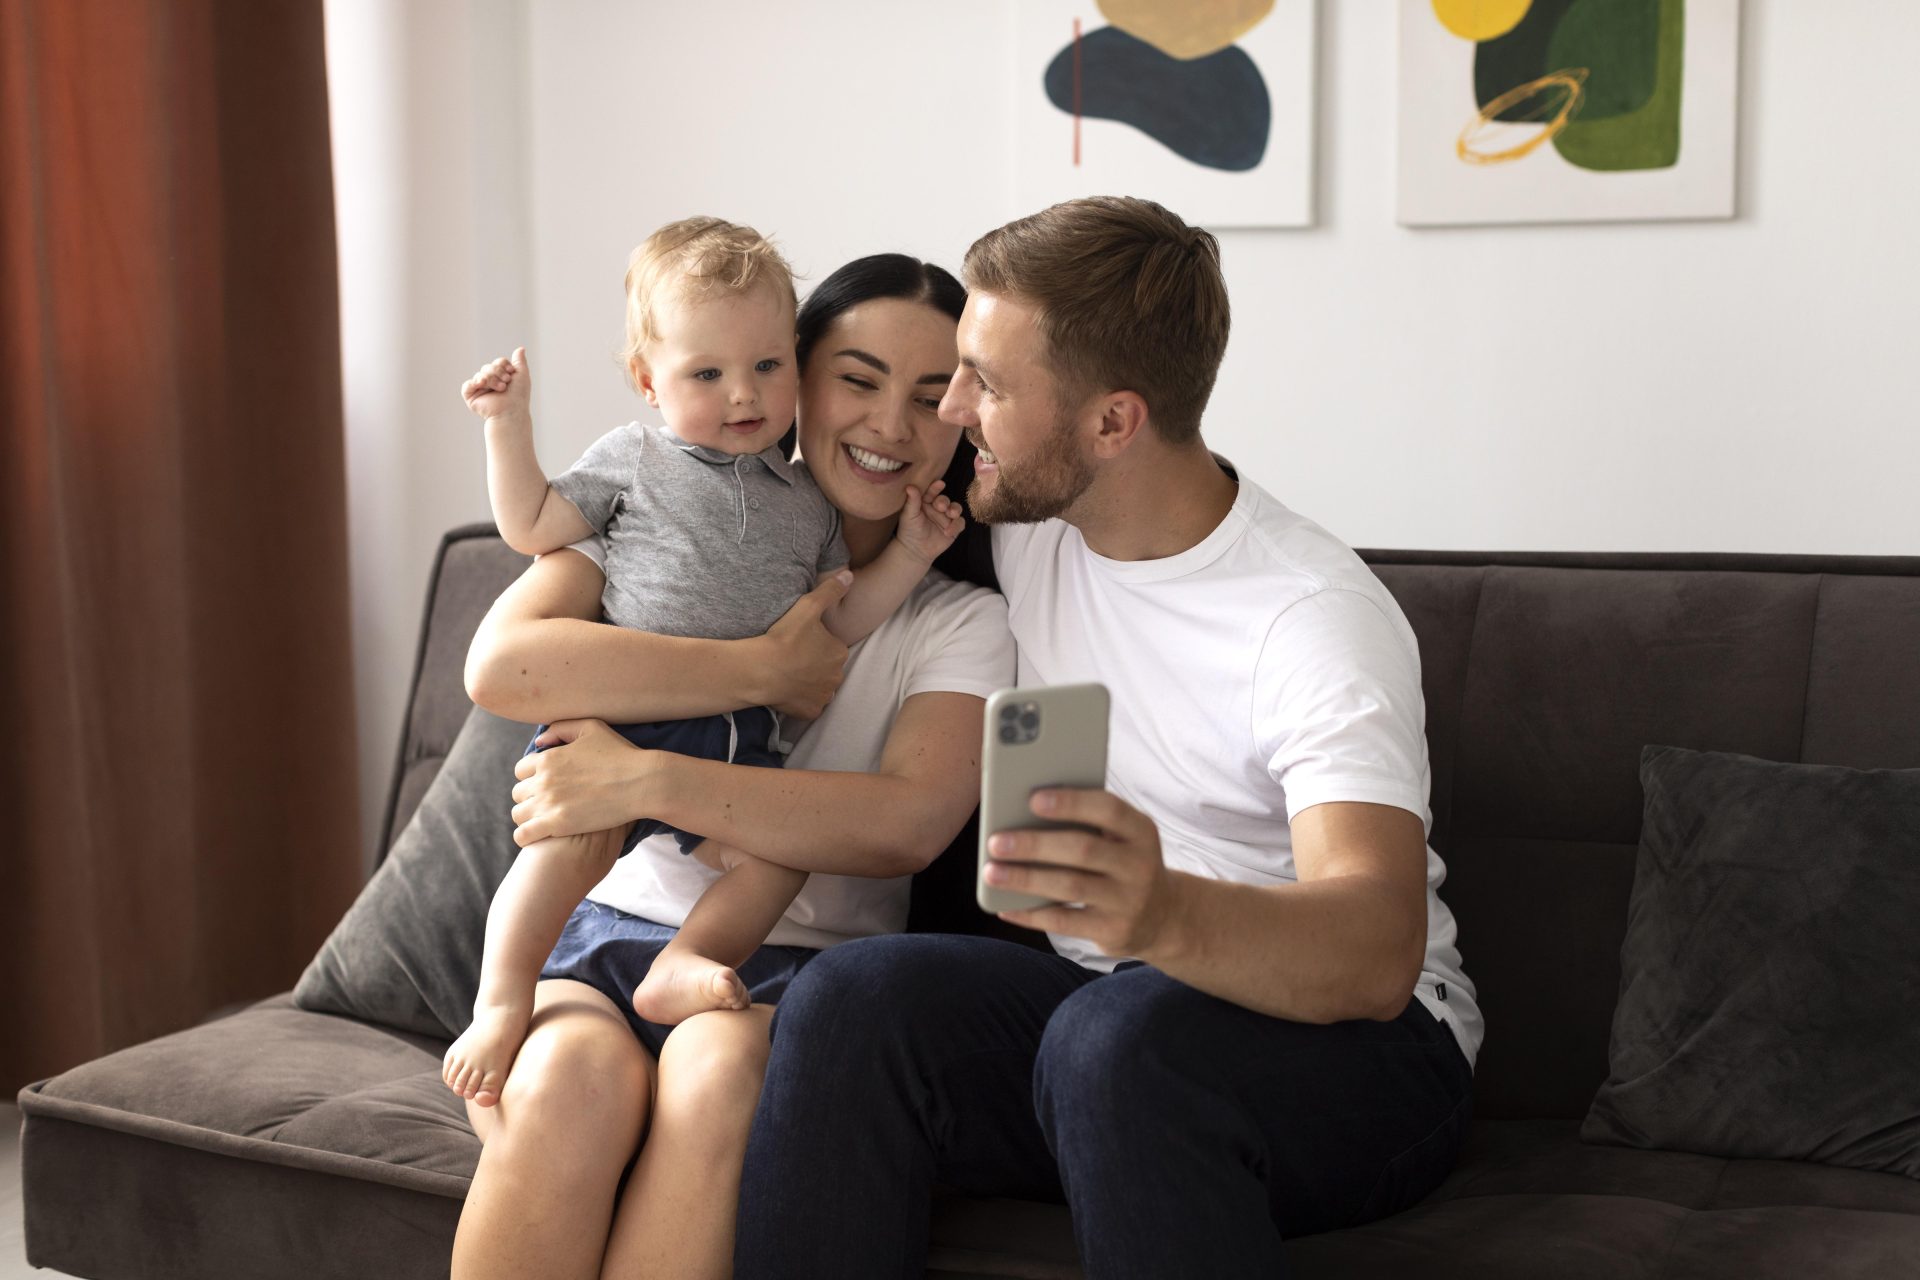 beautiful-people-having-video-call-with-their-family-home